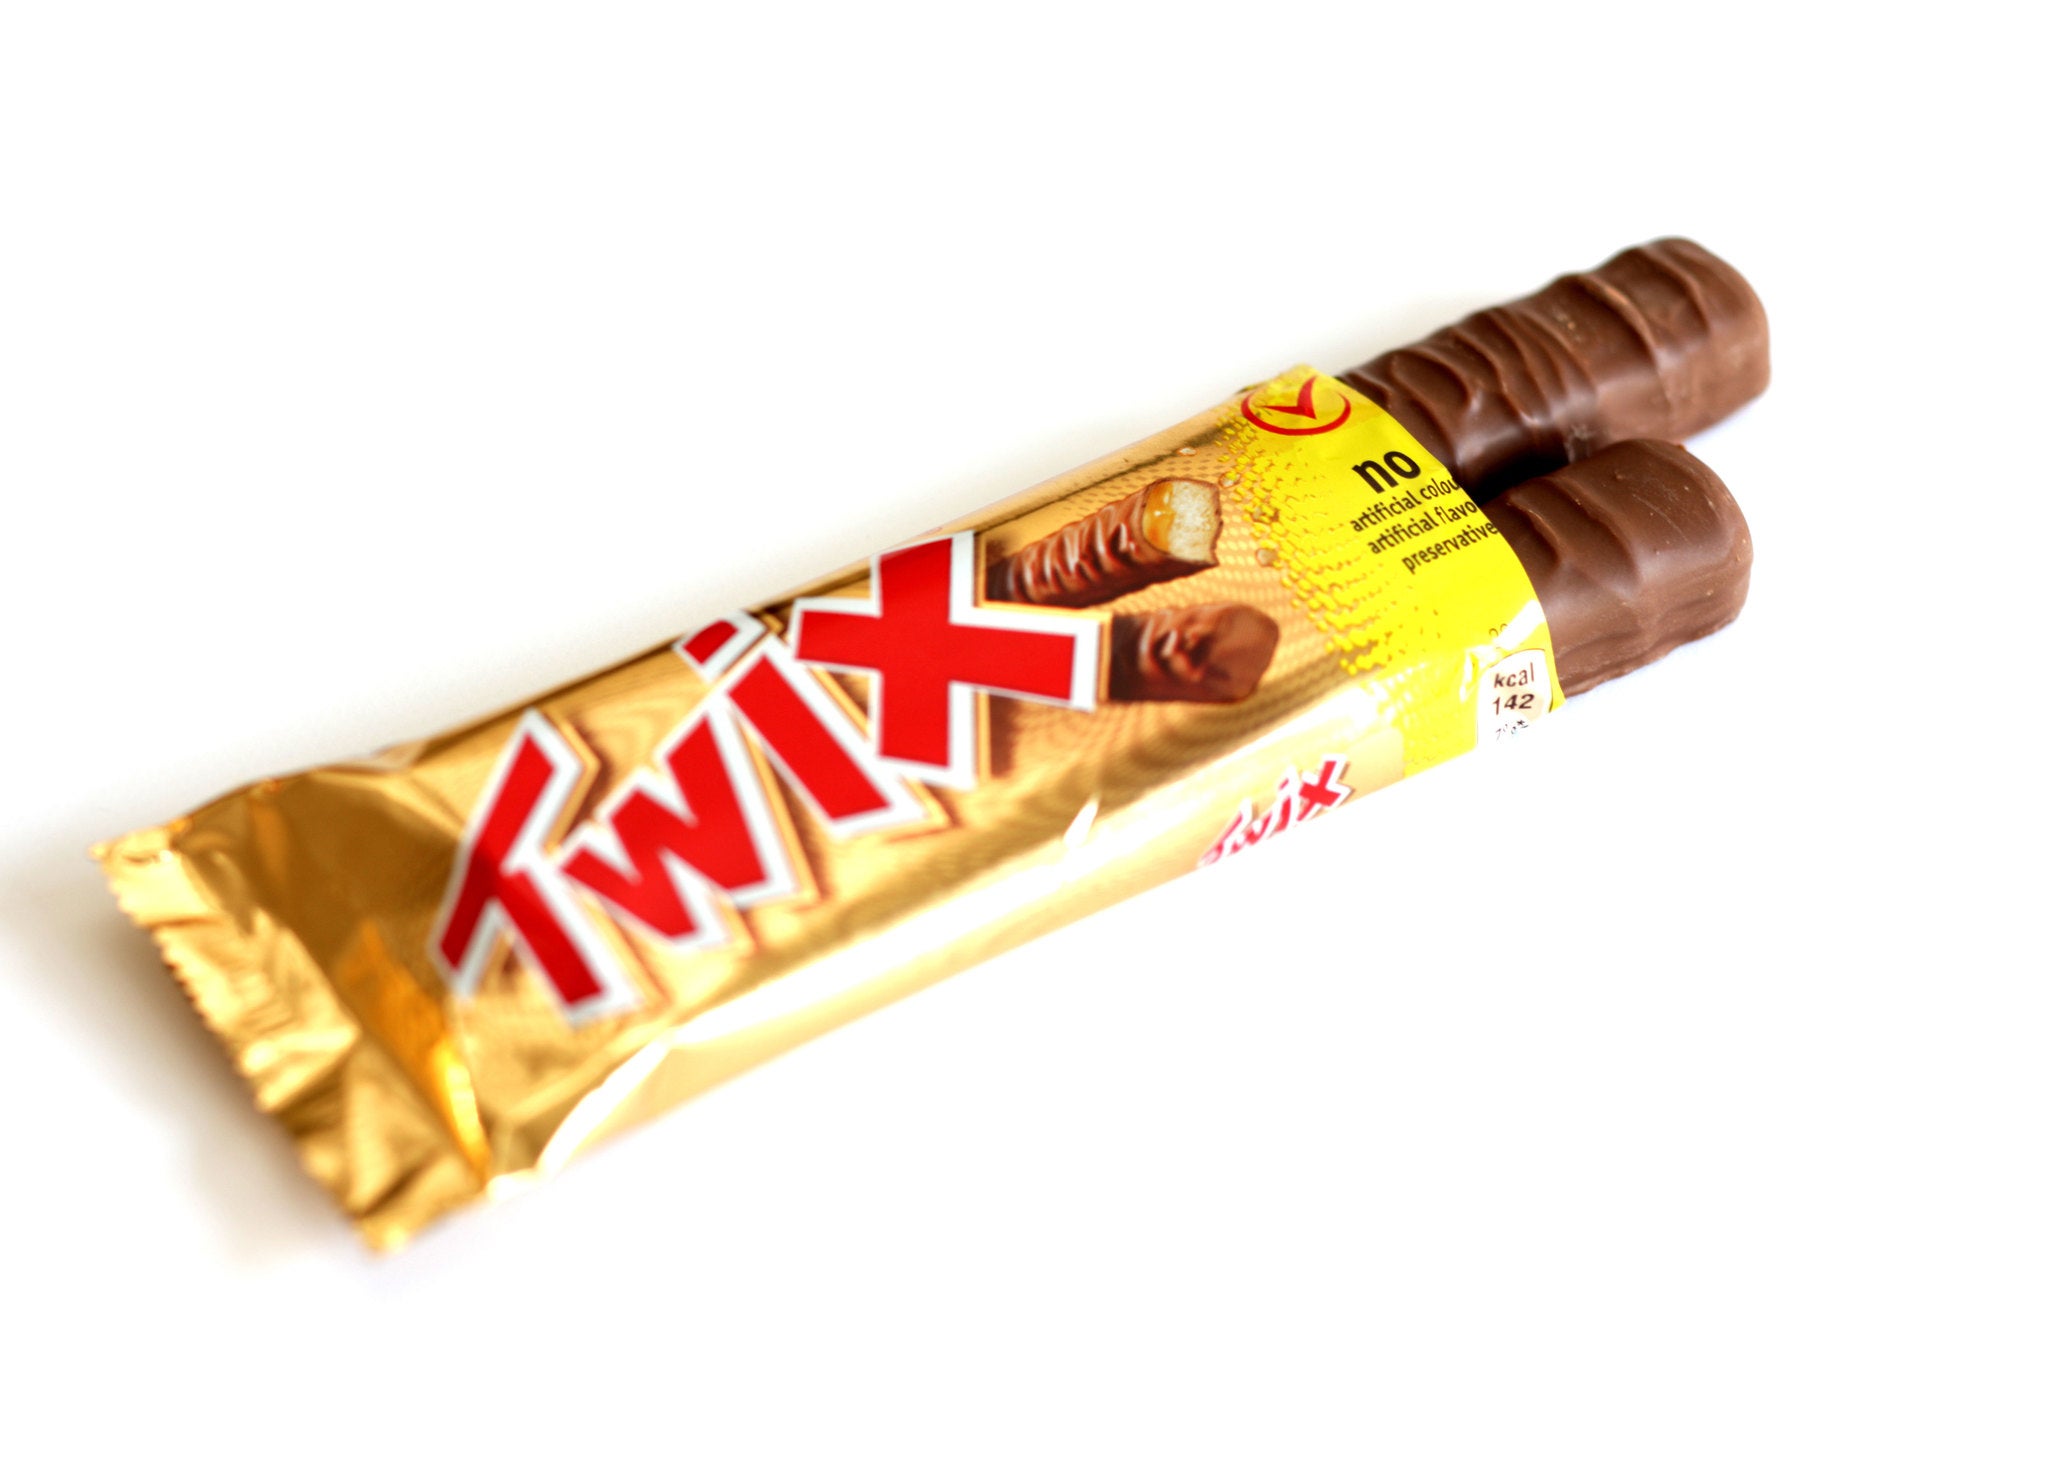 “Tips? Tricks? Spell it out for me, poppet.” “T…W…I…T…S” Ah! A Twix